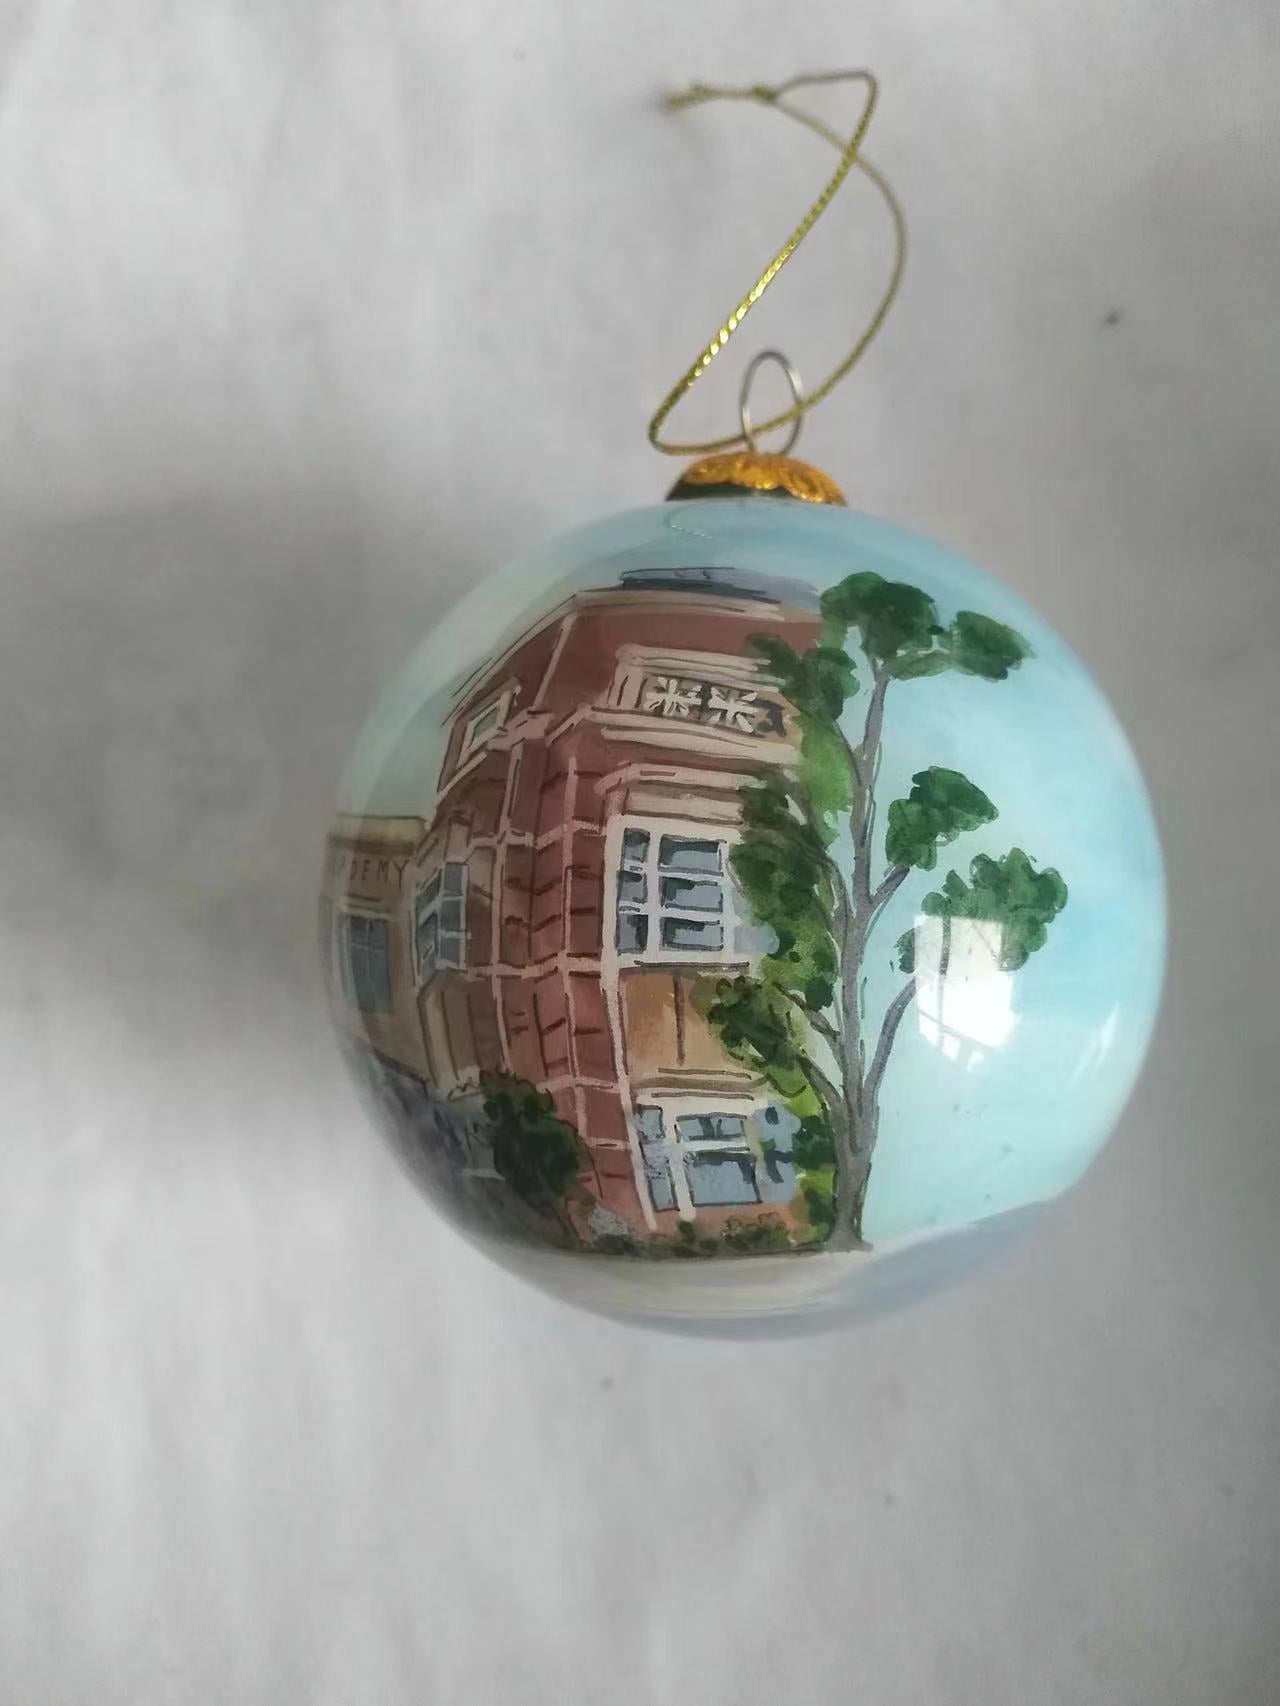 Limited Edition Handpainted Ornament by Sarah Lytle '89